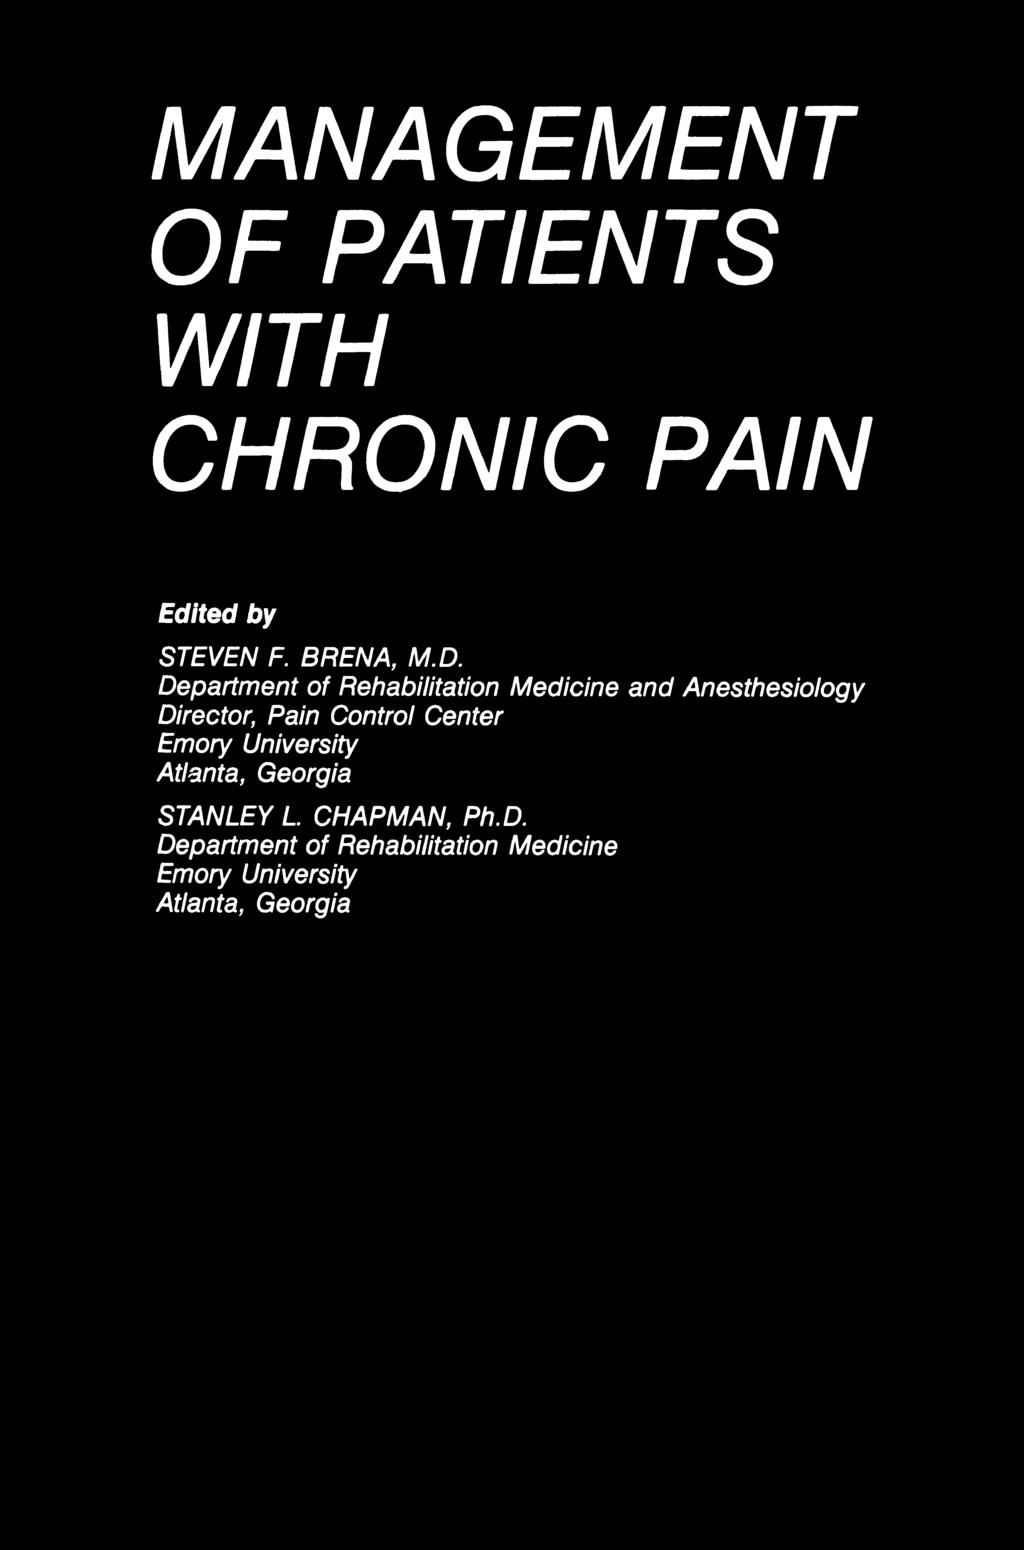 MANAGEMENT OF PATIENTS WITH CHRONIC PAIN Edited by STEVEN F.